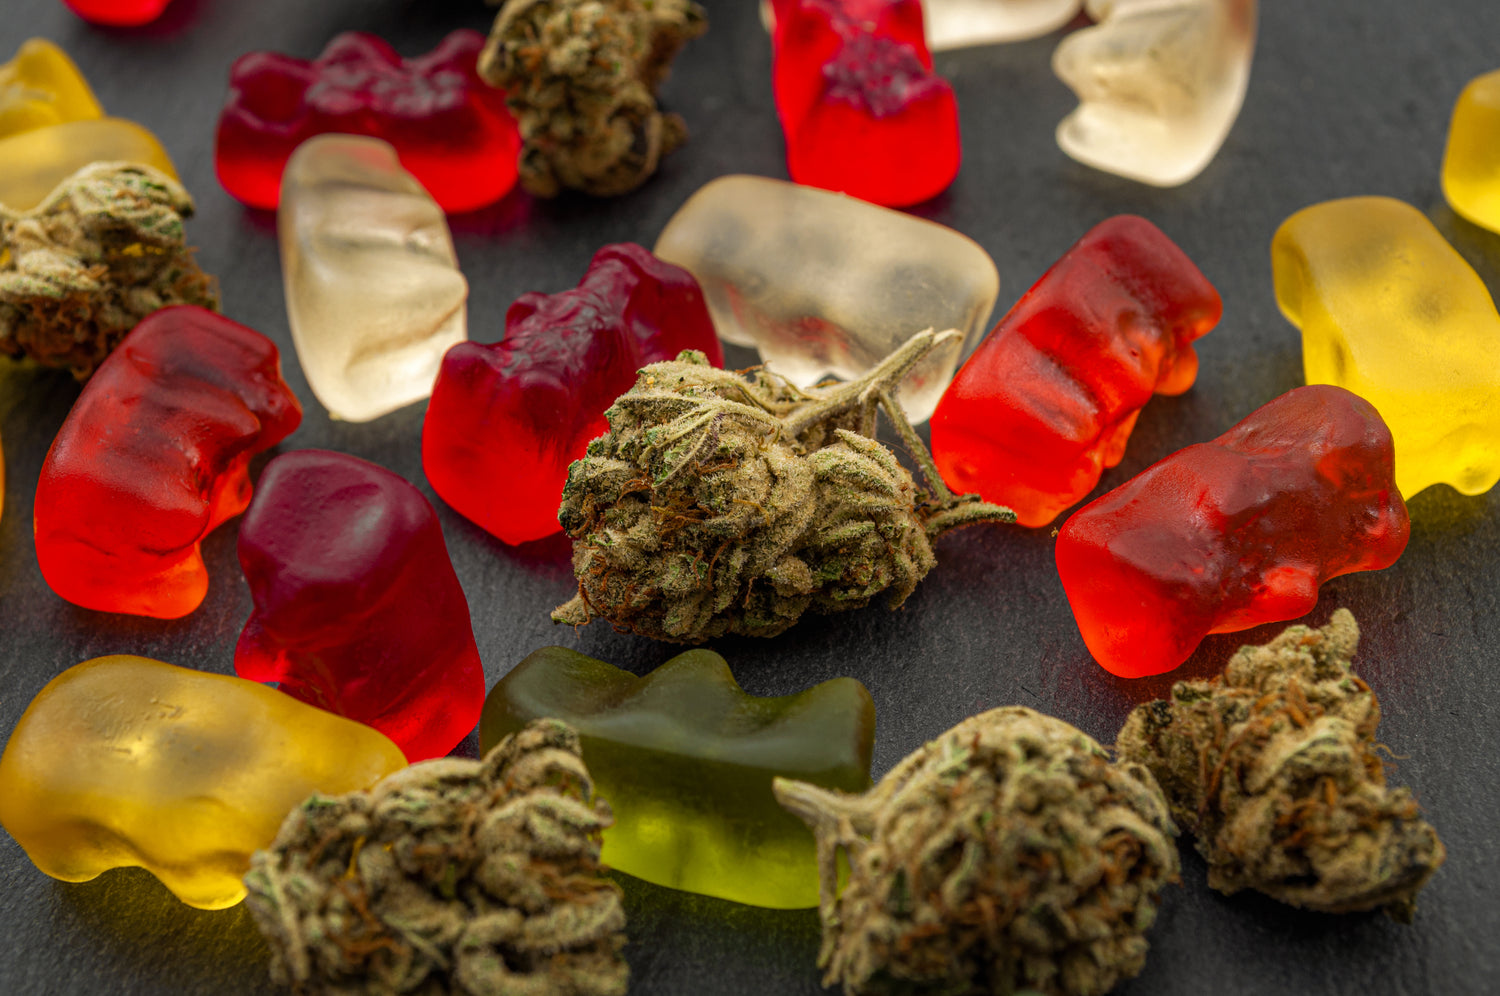 Cannabis-Infused Candy Making Supplies And Molds